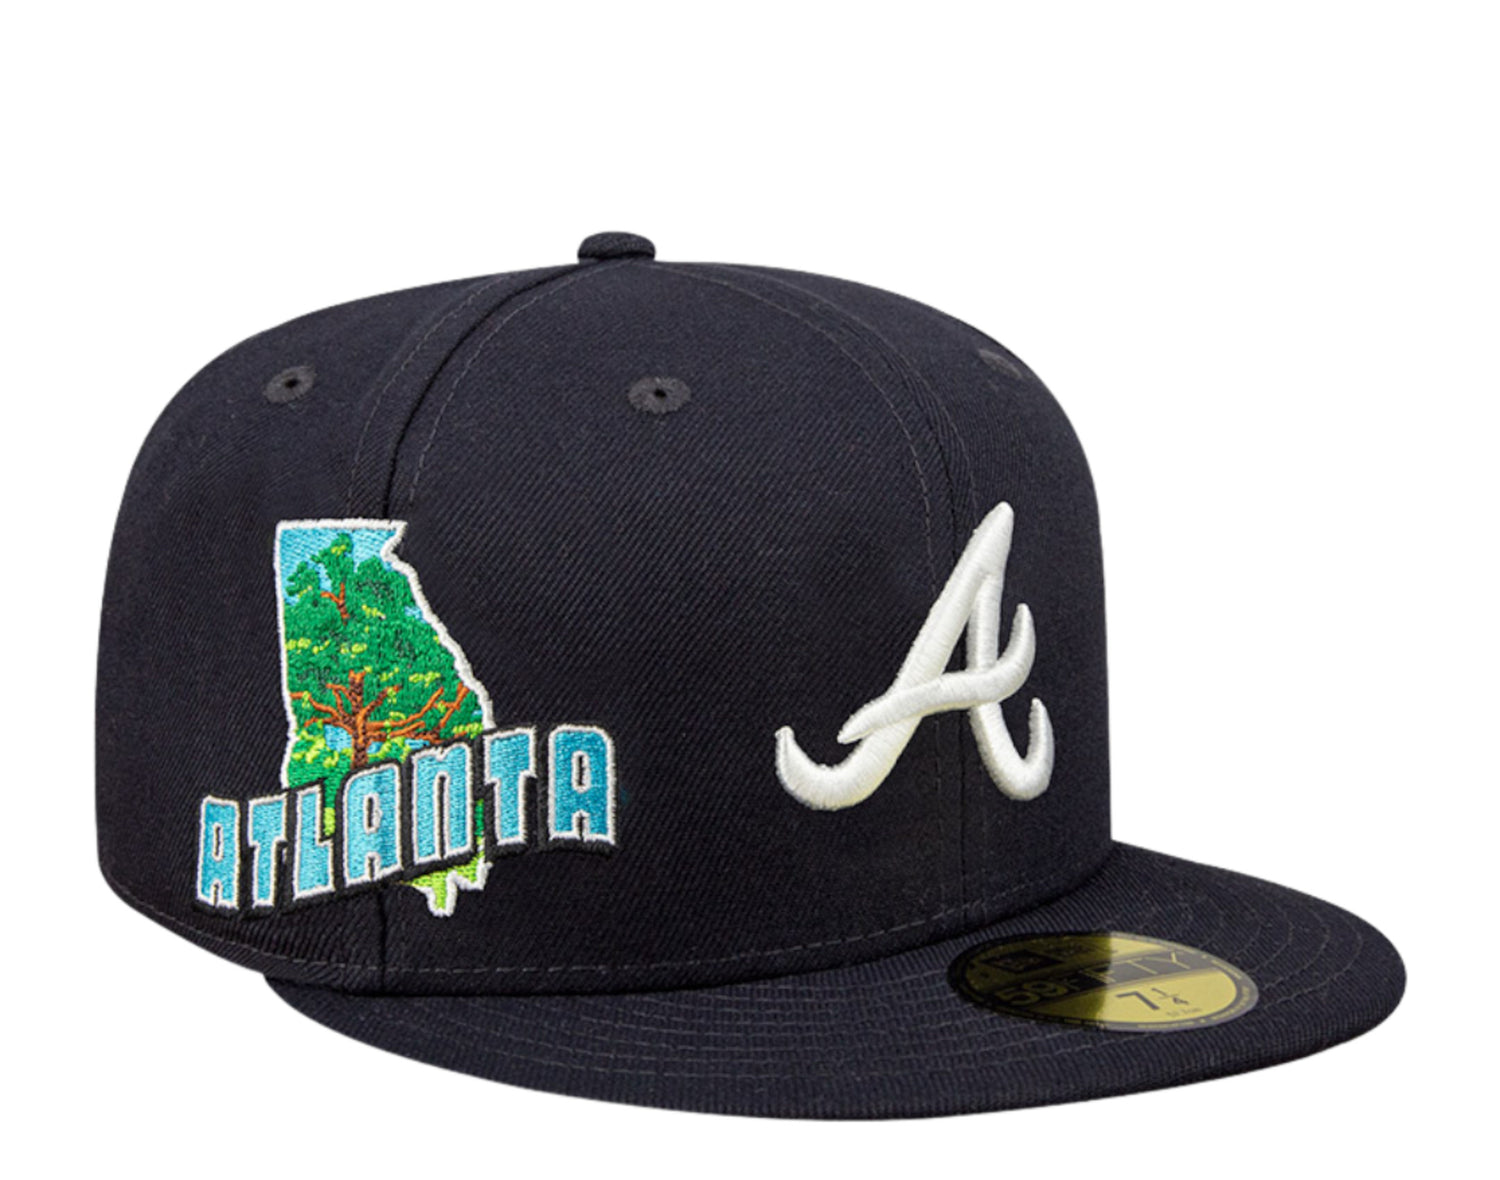 New Era 59Fifty MLB Atlanta Braves Stateview Fitted Hat